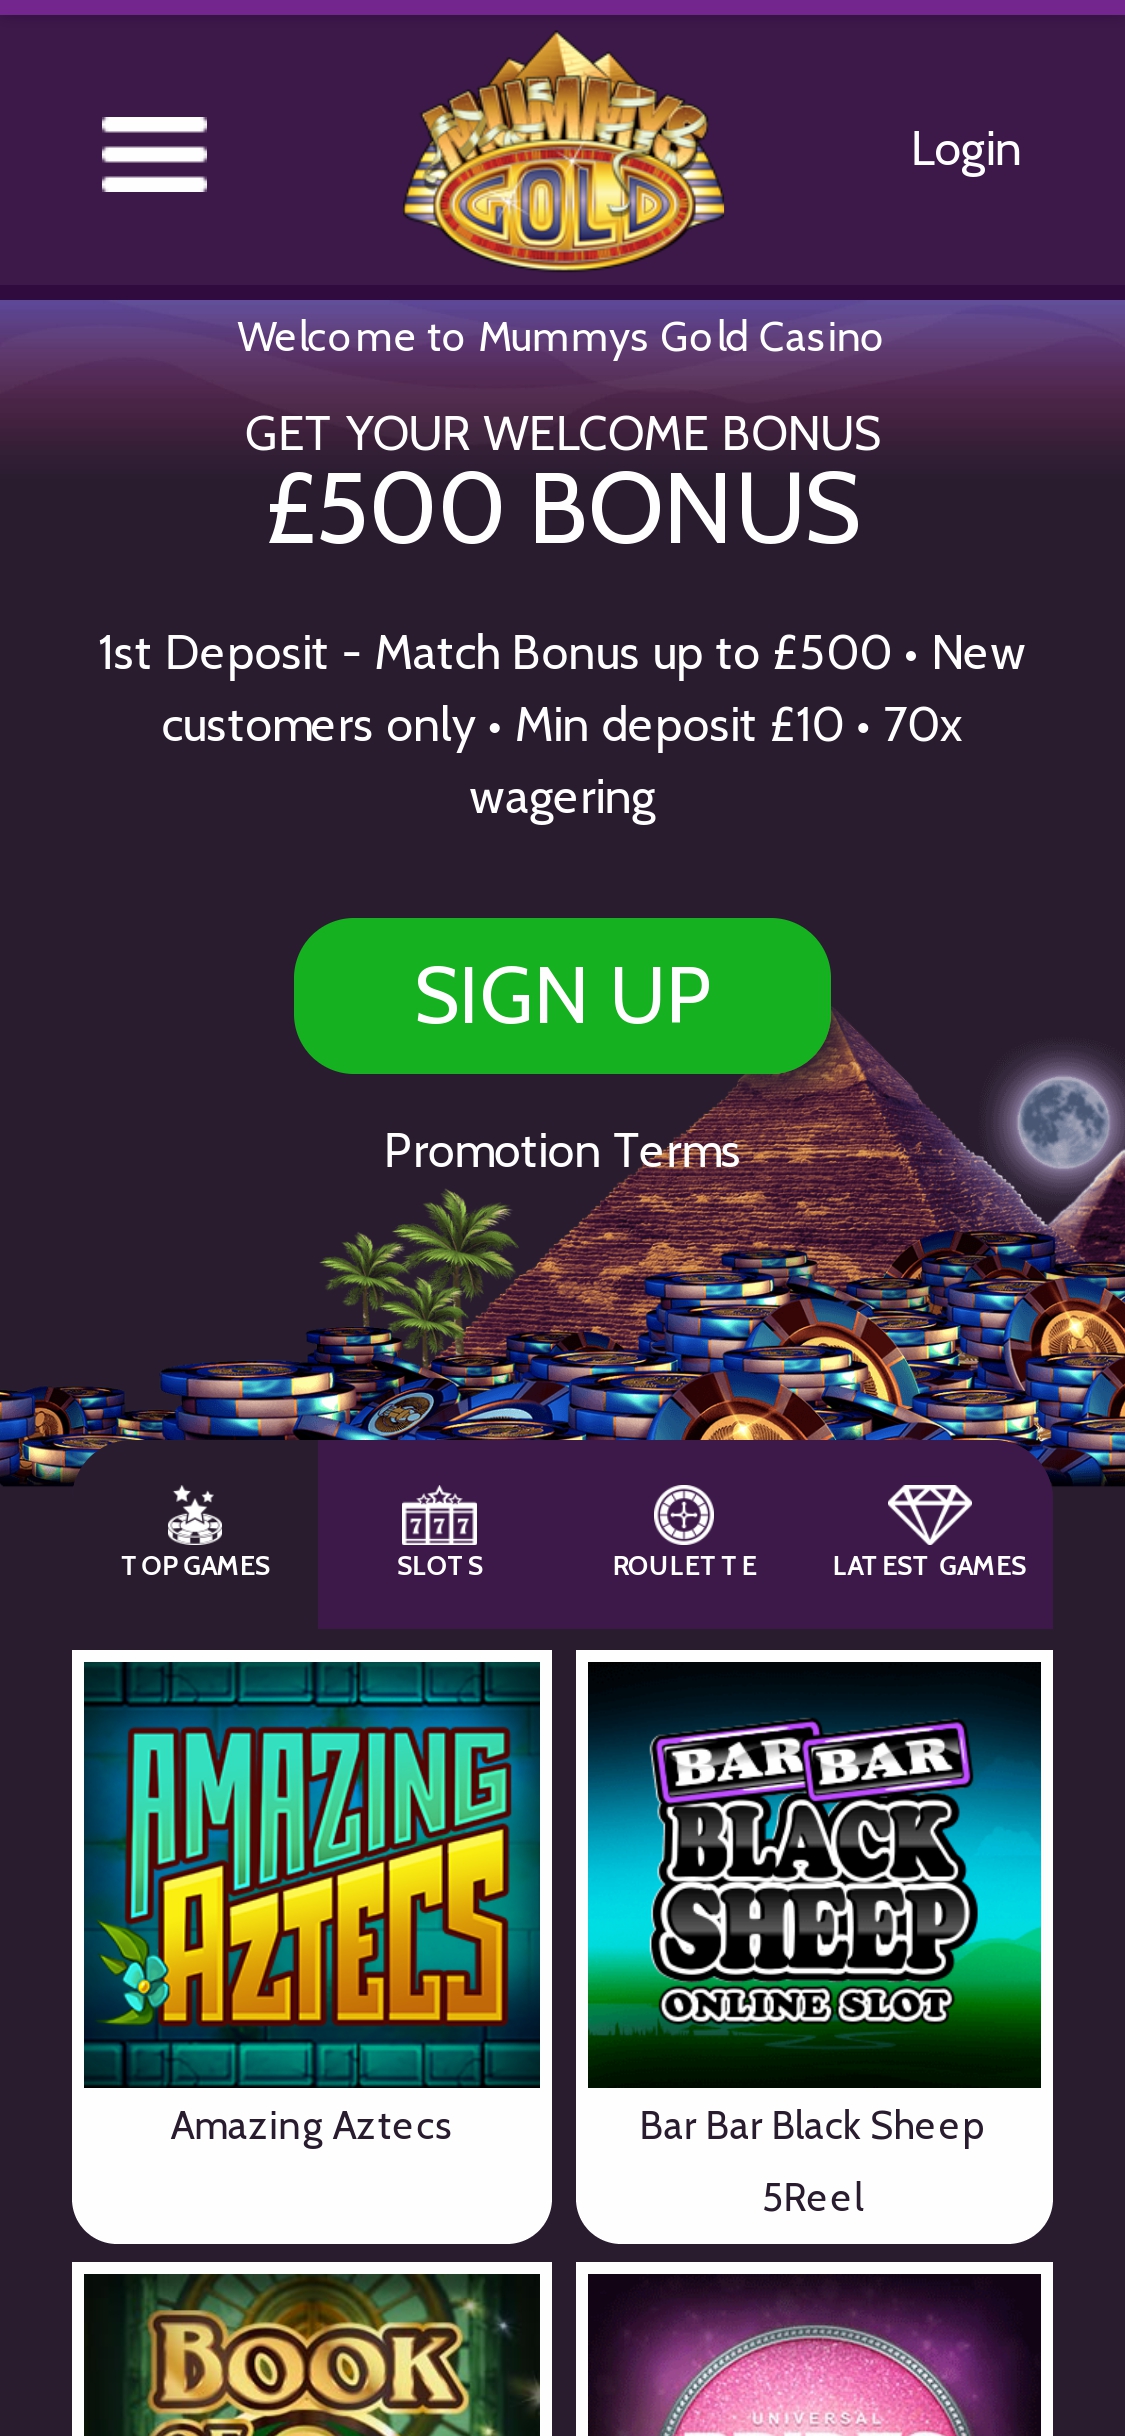 Mummys Gold Casino Mobile Review